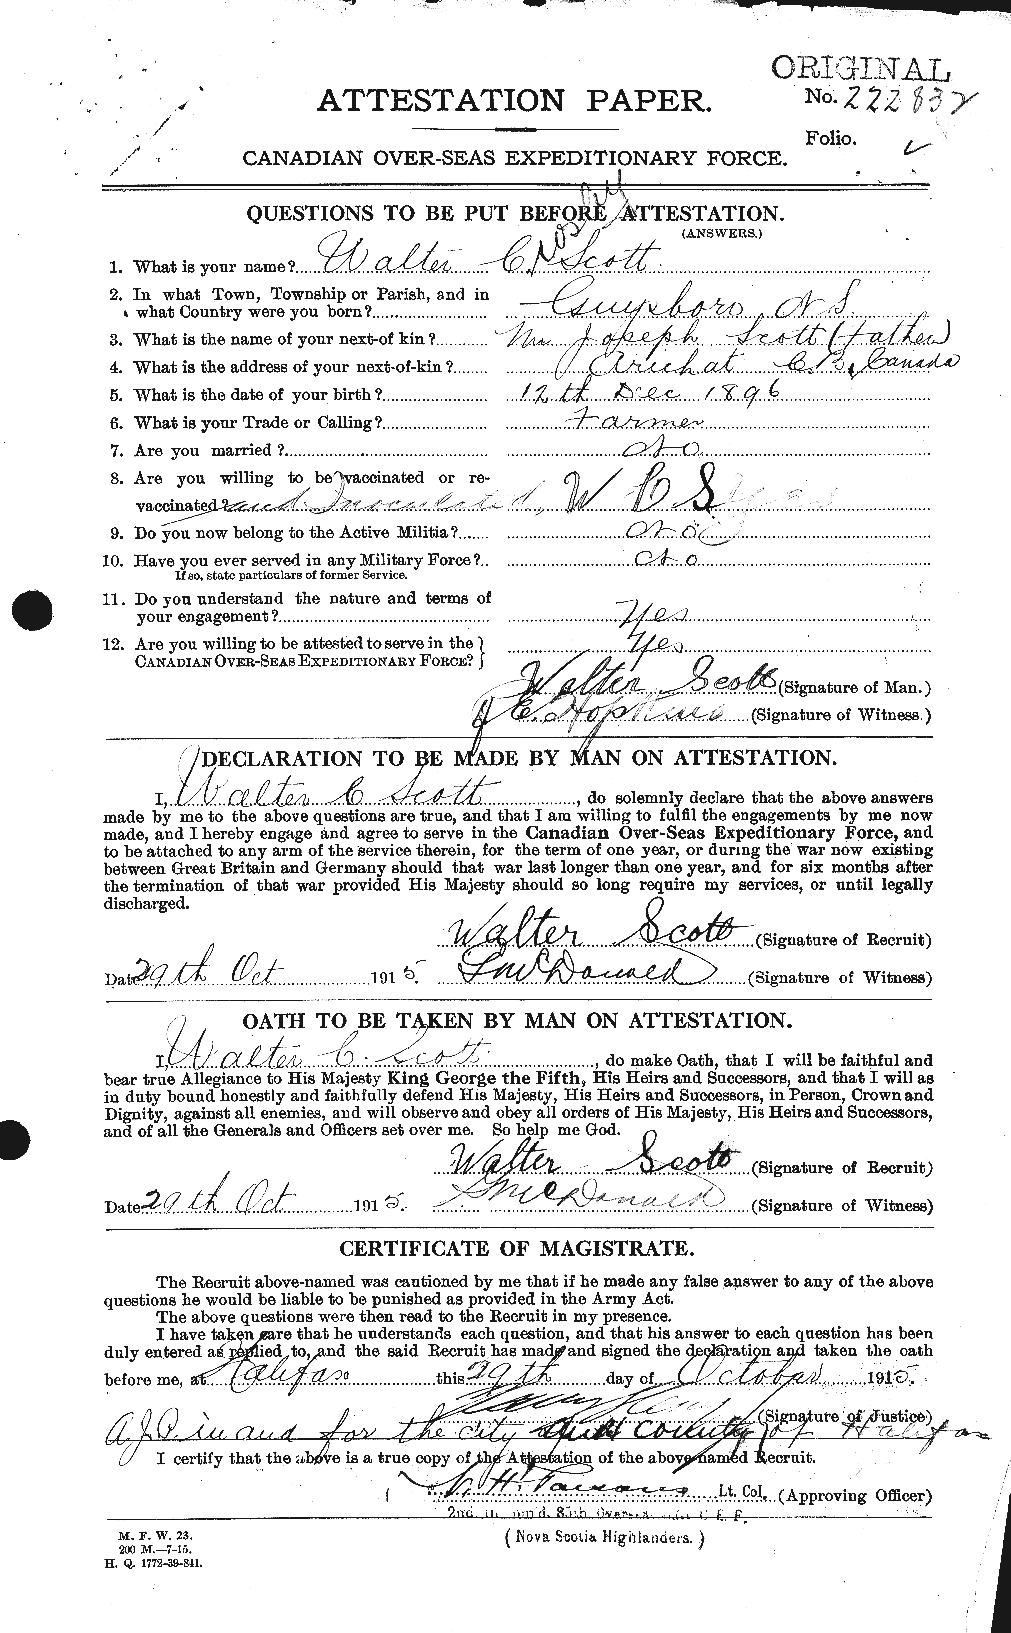 Personnel Records of the First World War - CEF 087998a